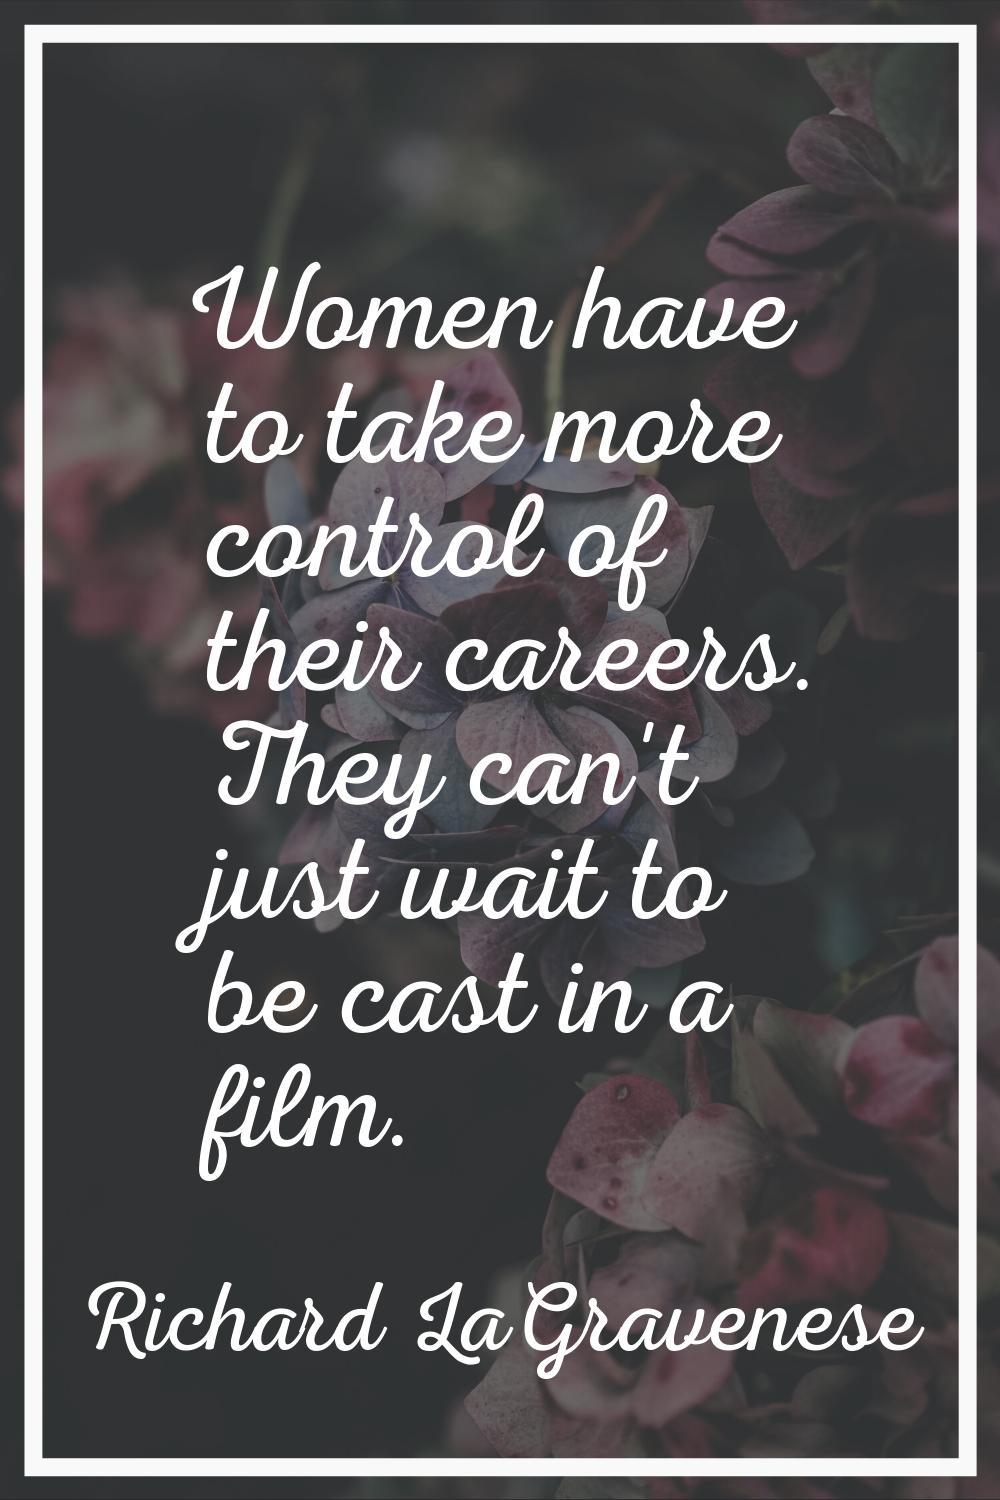 Women have to take more control of their careers. They can't just wait to be cast in a film.